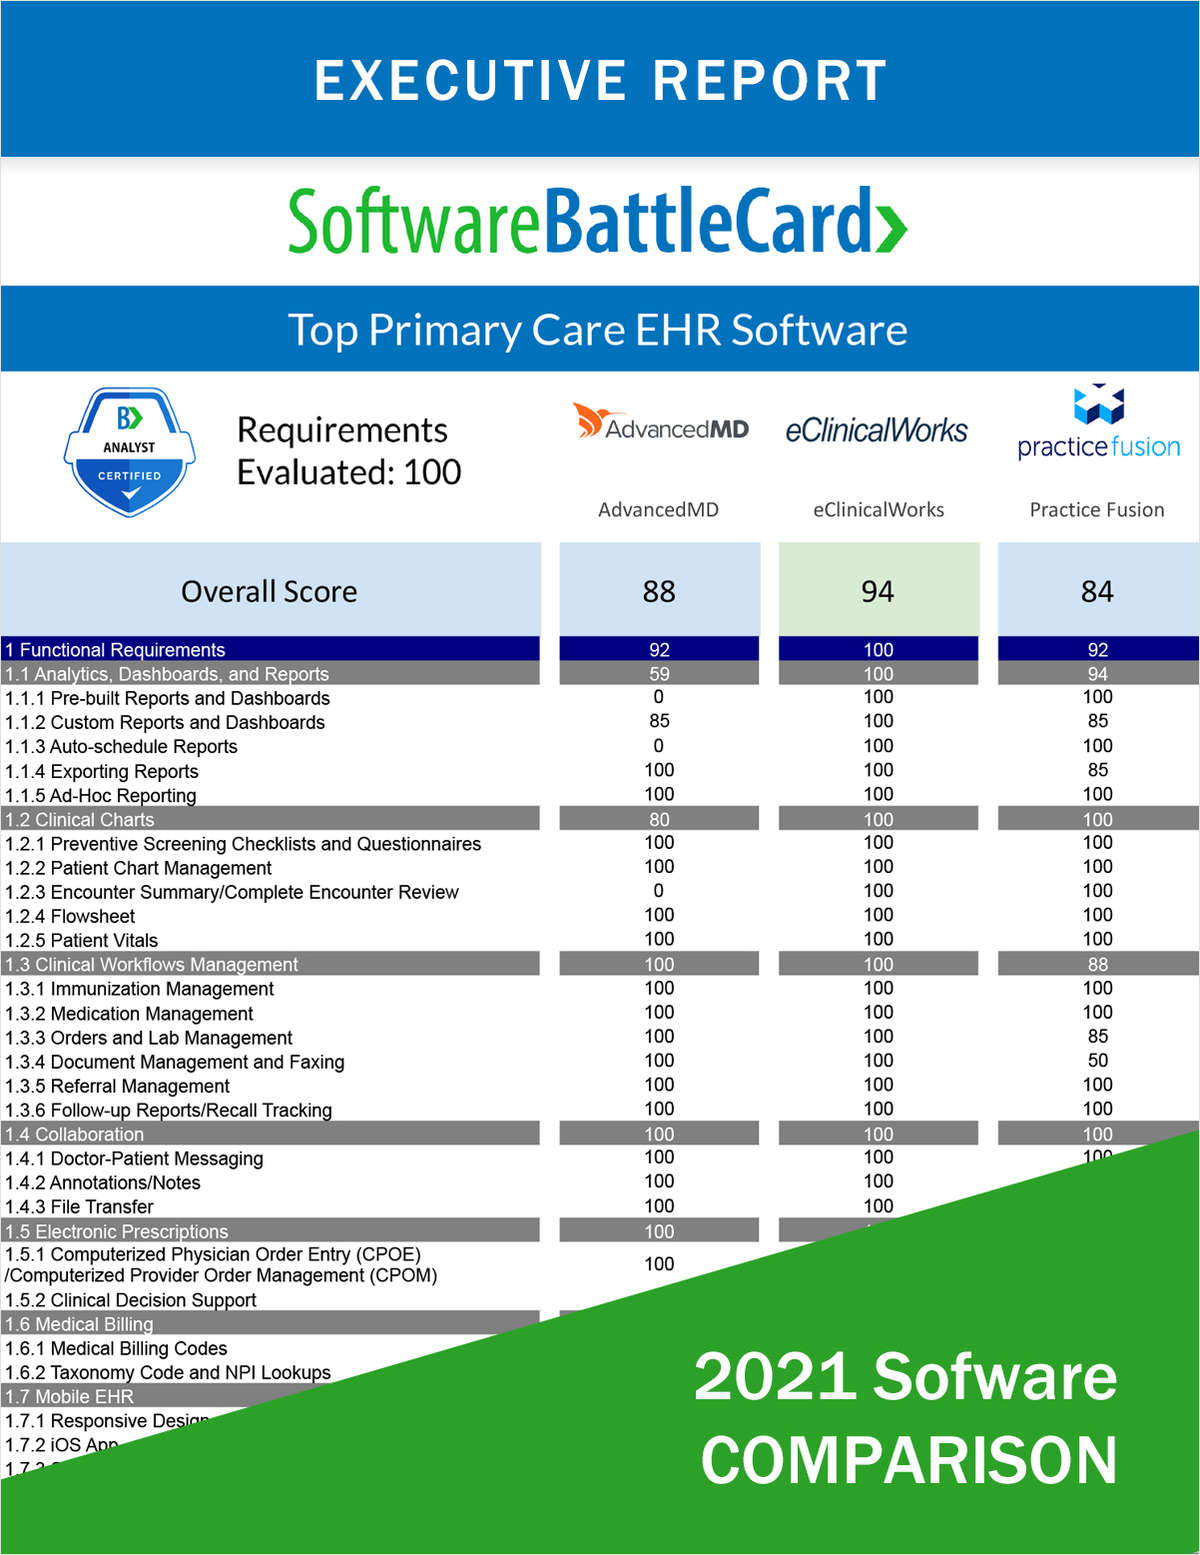 Primary Care EHR Software BattleCard--AdvancedMD vs. eClinicalWorks vs. Practice Fusion